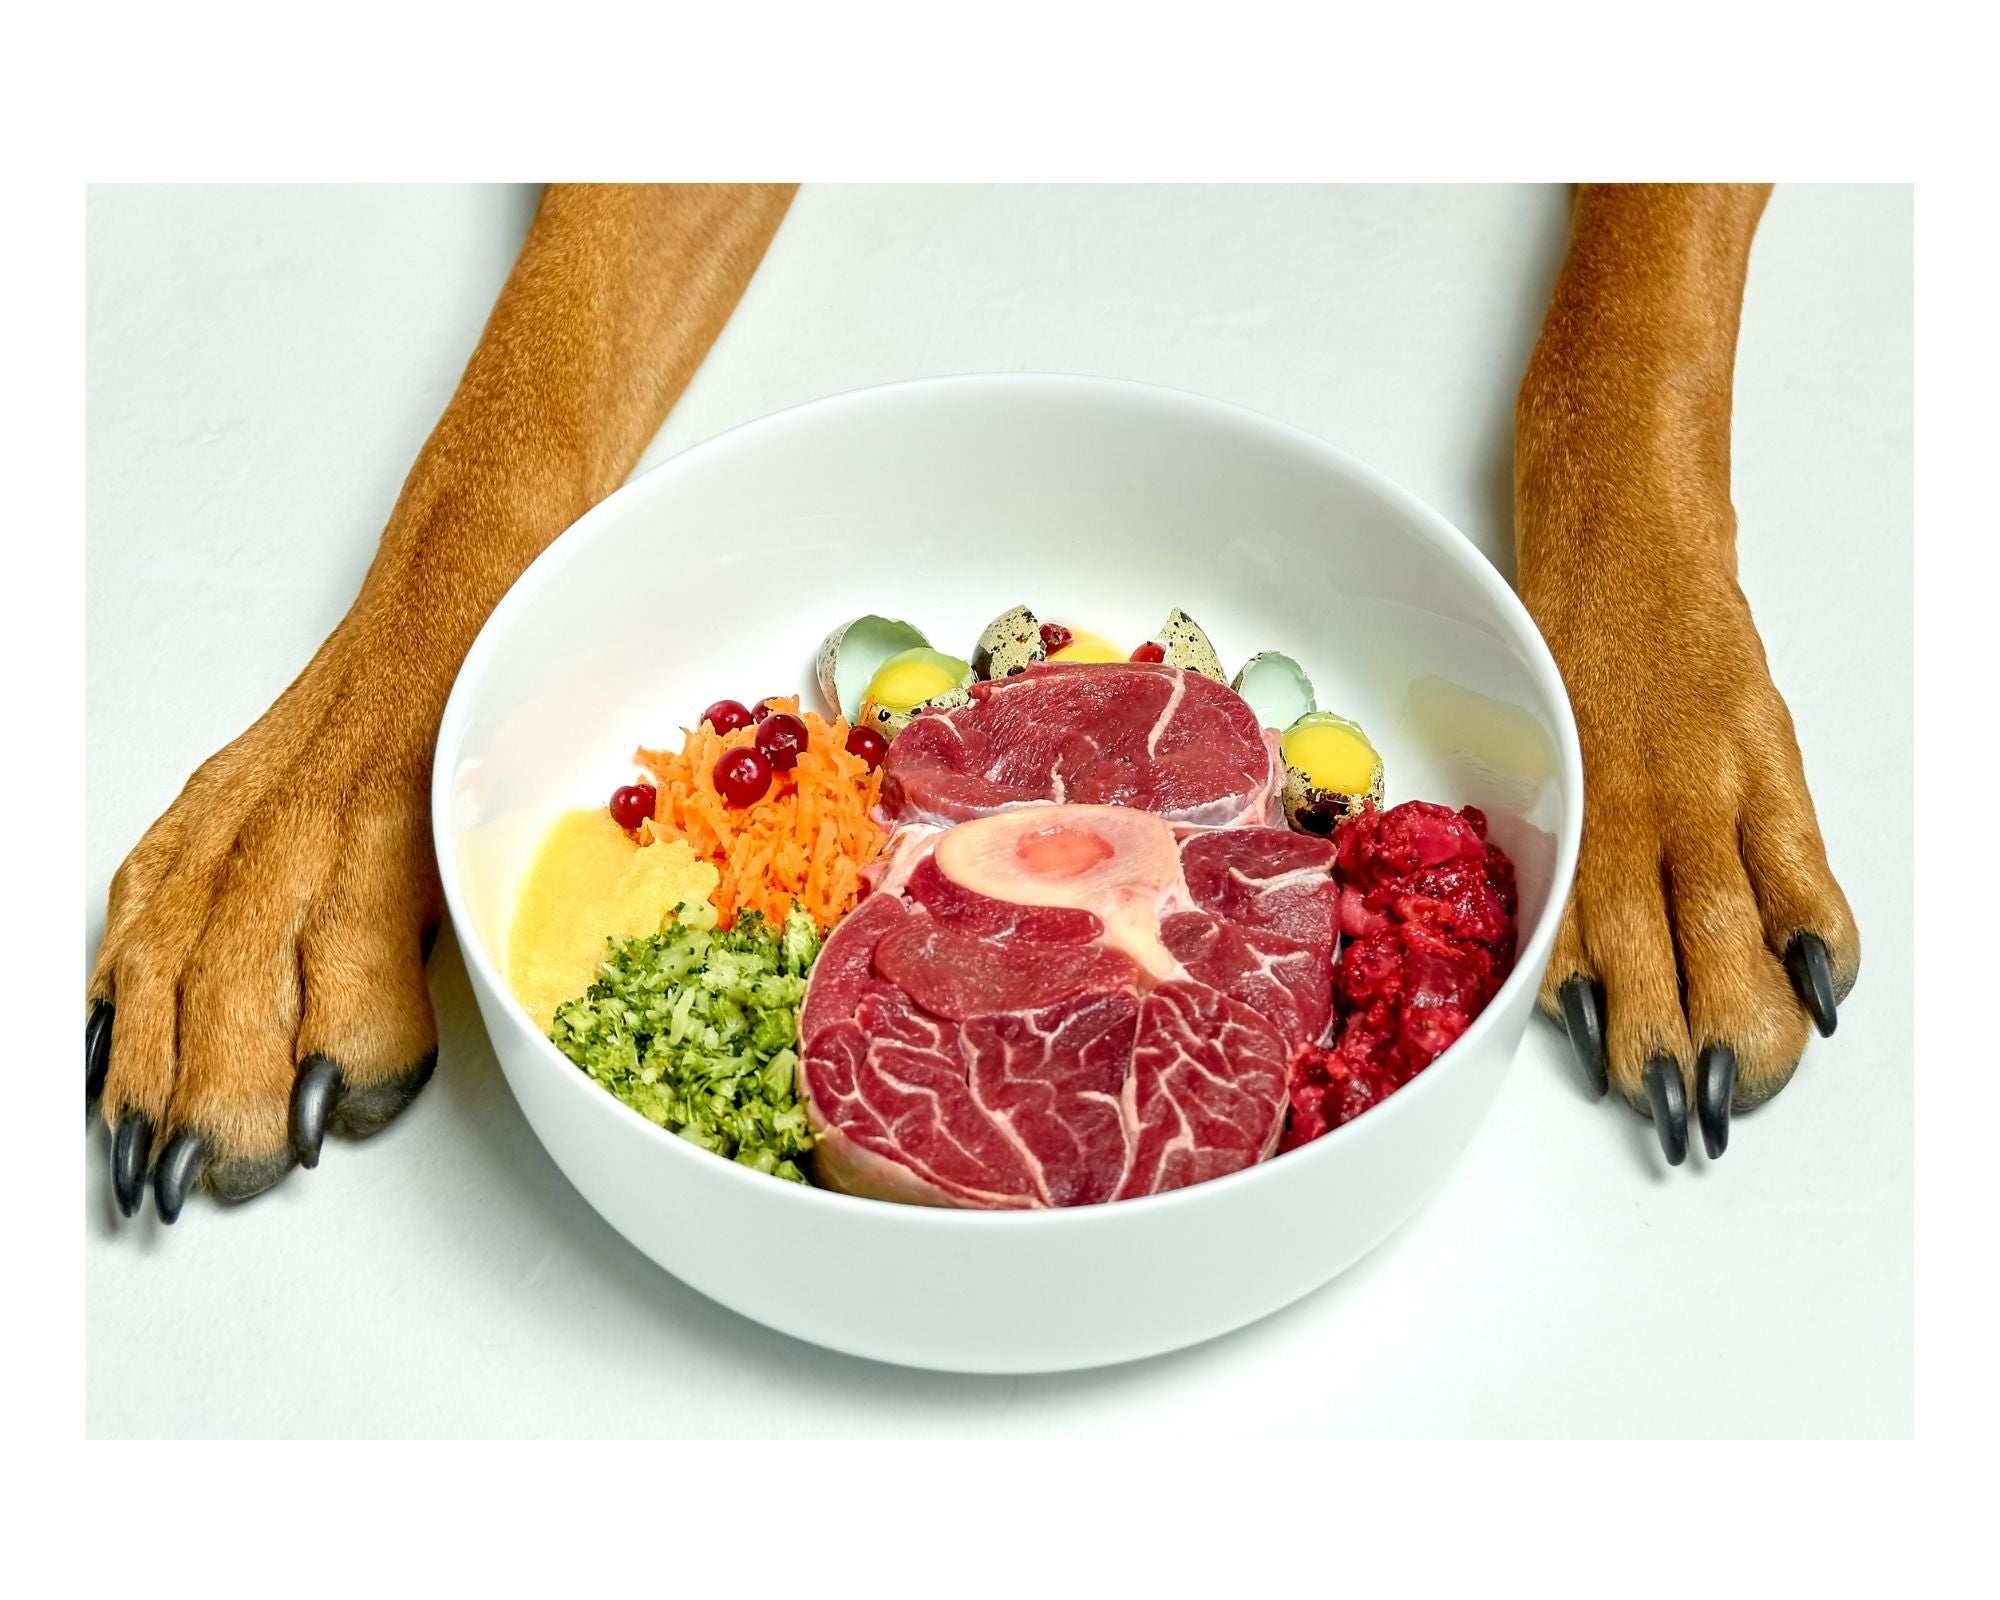 What Should You Feed Your Dog? Raw vs. Kibble